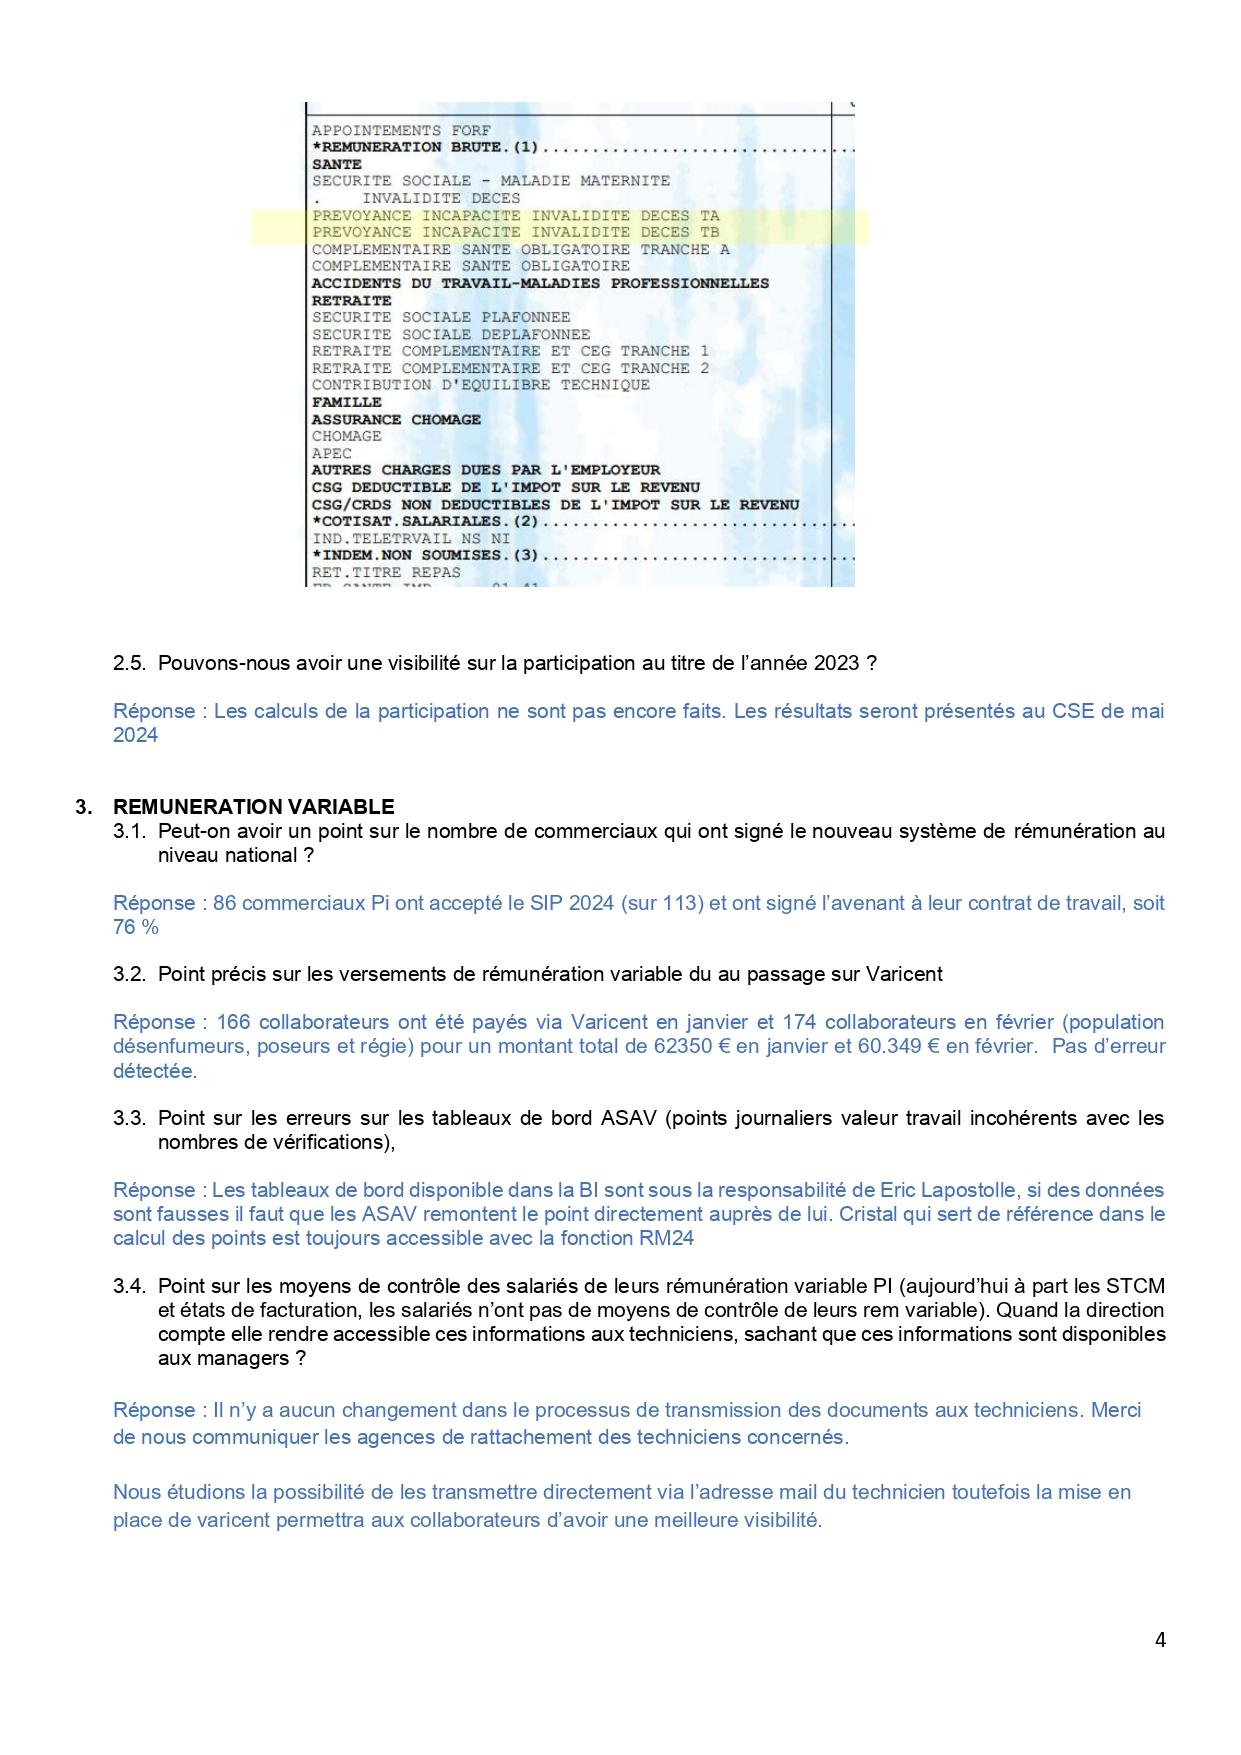 Reponses aux questions du cse 21 03 24 vdef pages to jpg 0004